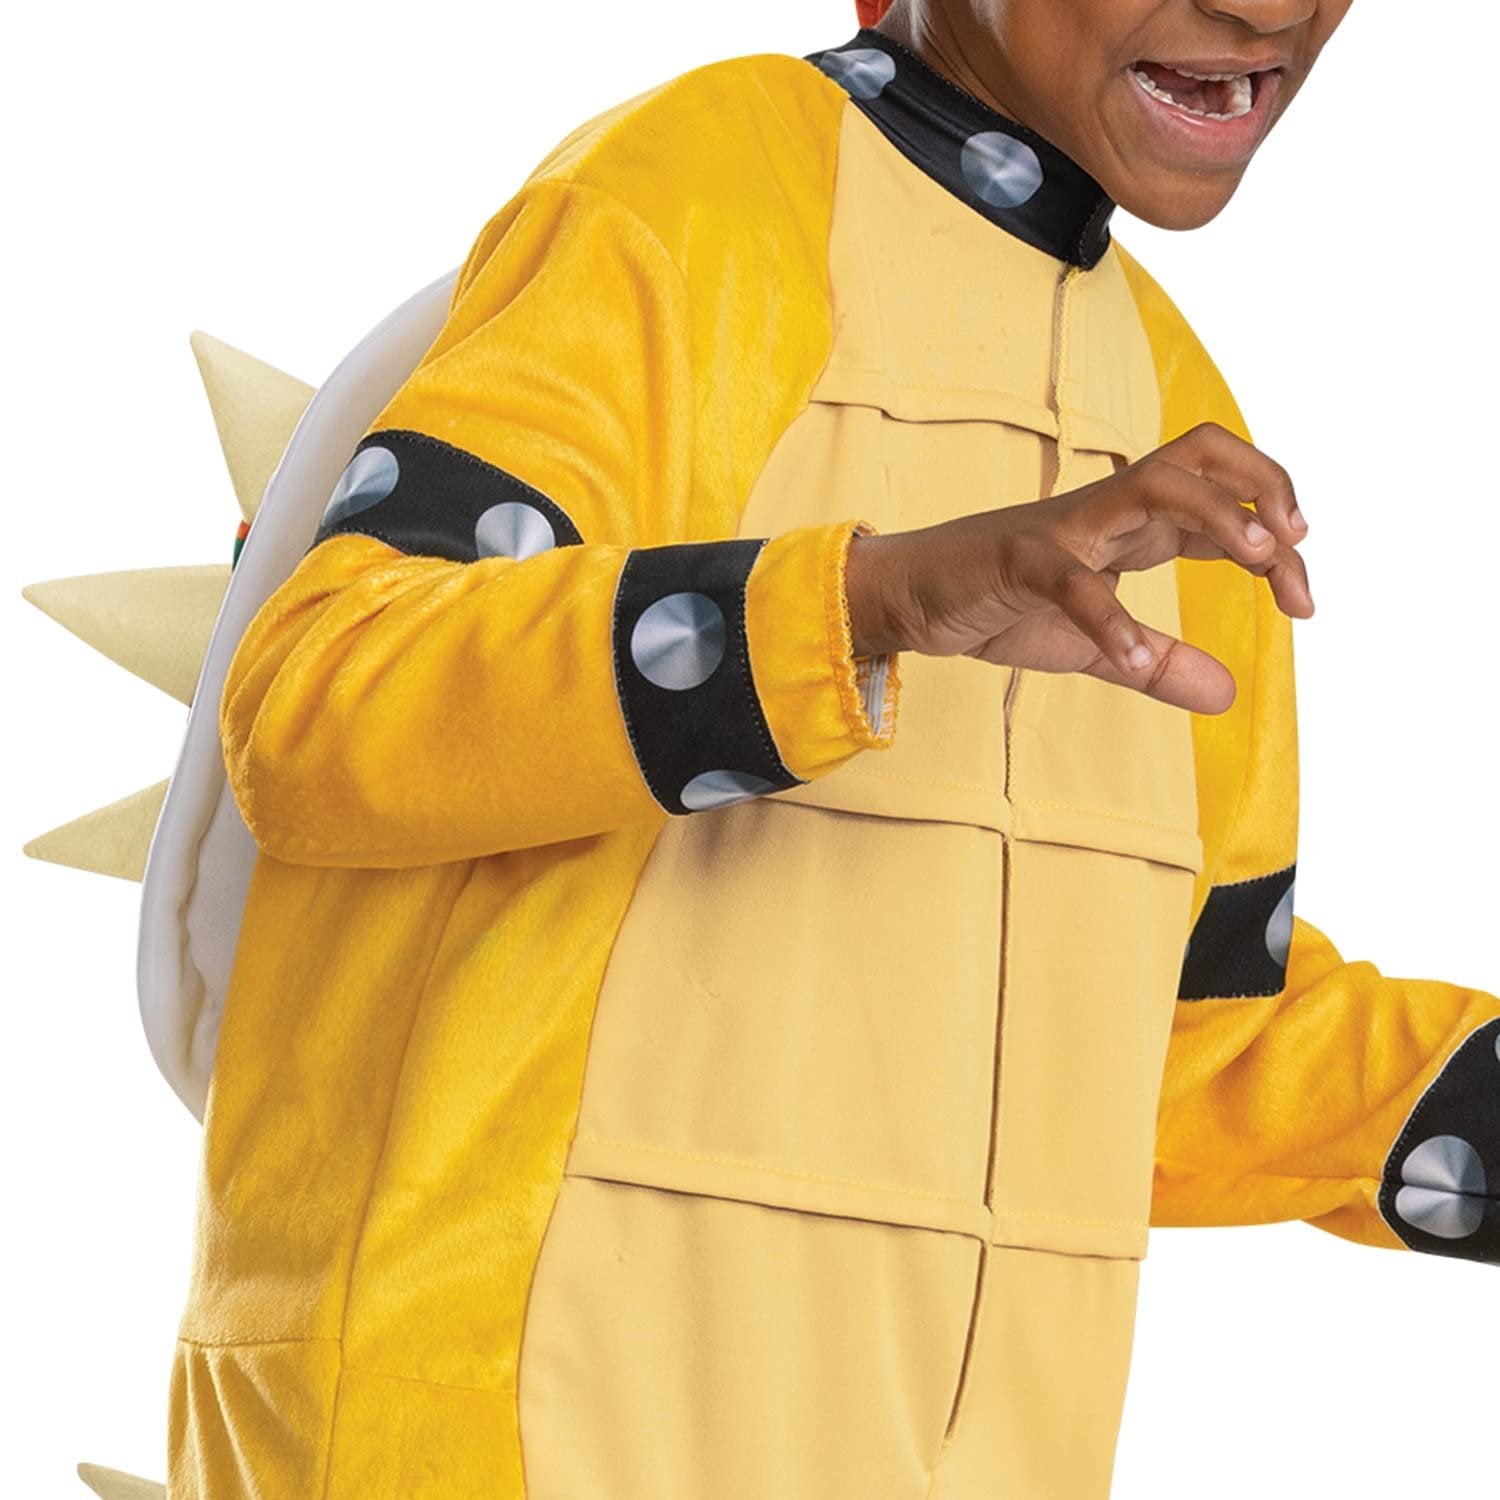 Bowser Costume Hooded Jumpsuit, Official Super Mario Character Costume for Kids, Size (10-12)